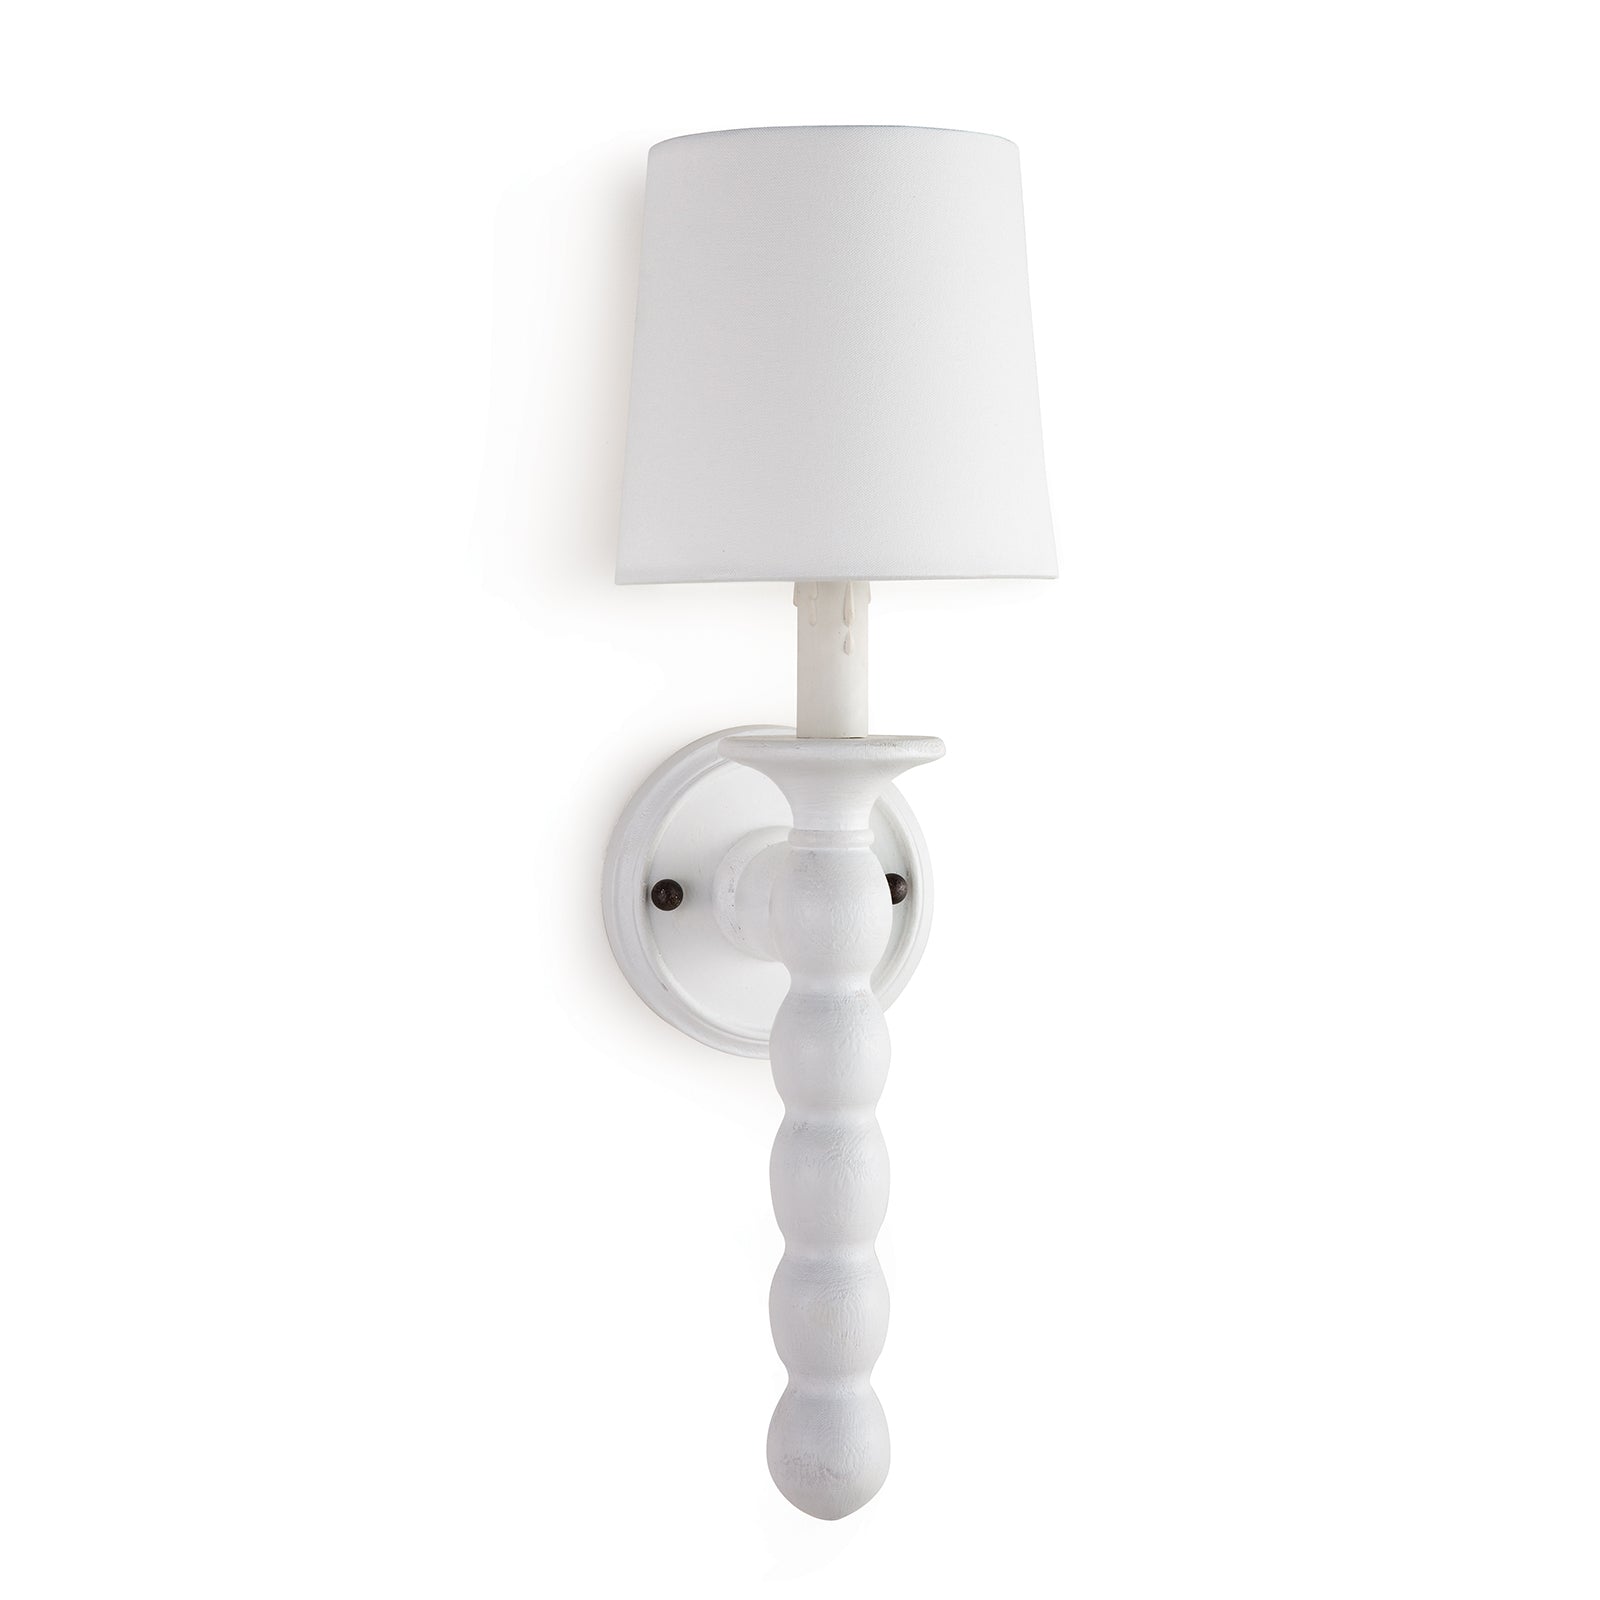 Perennial Sconce in White by Coastal Living